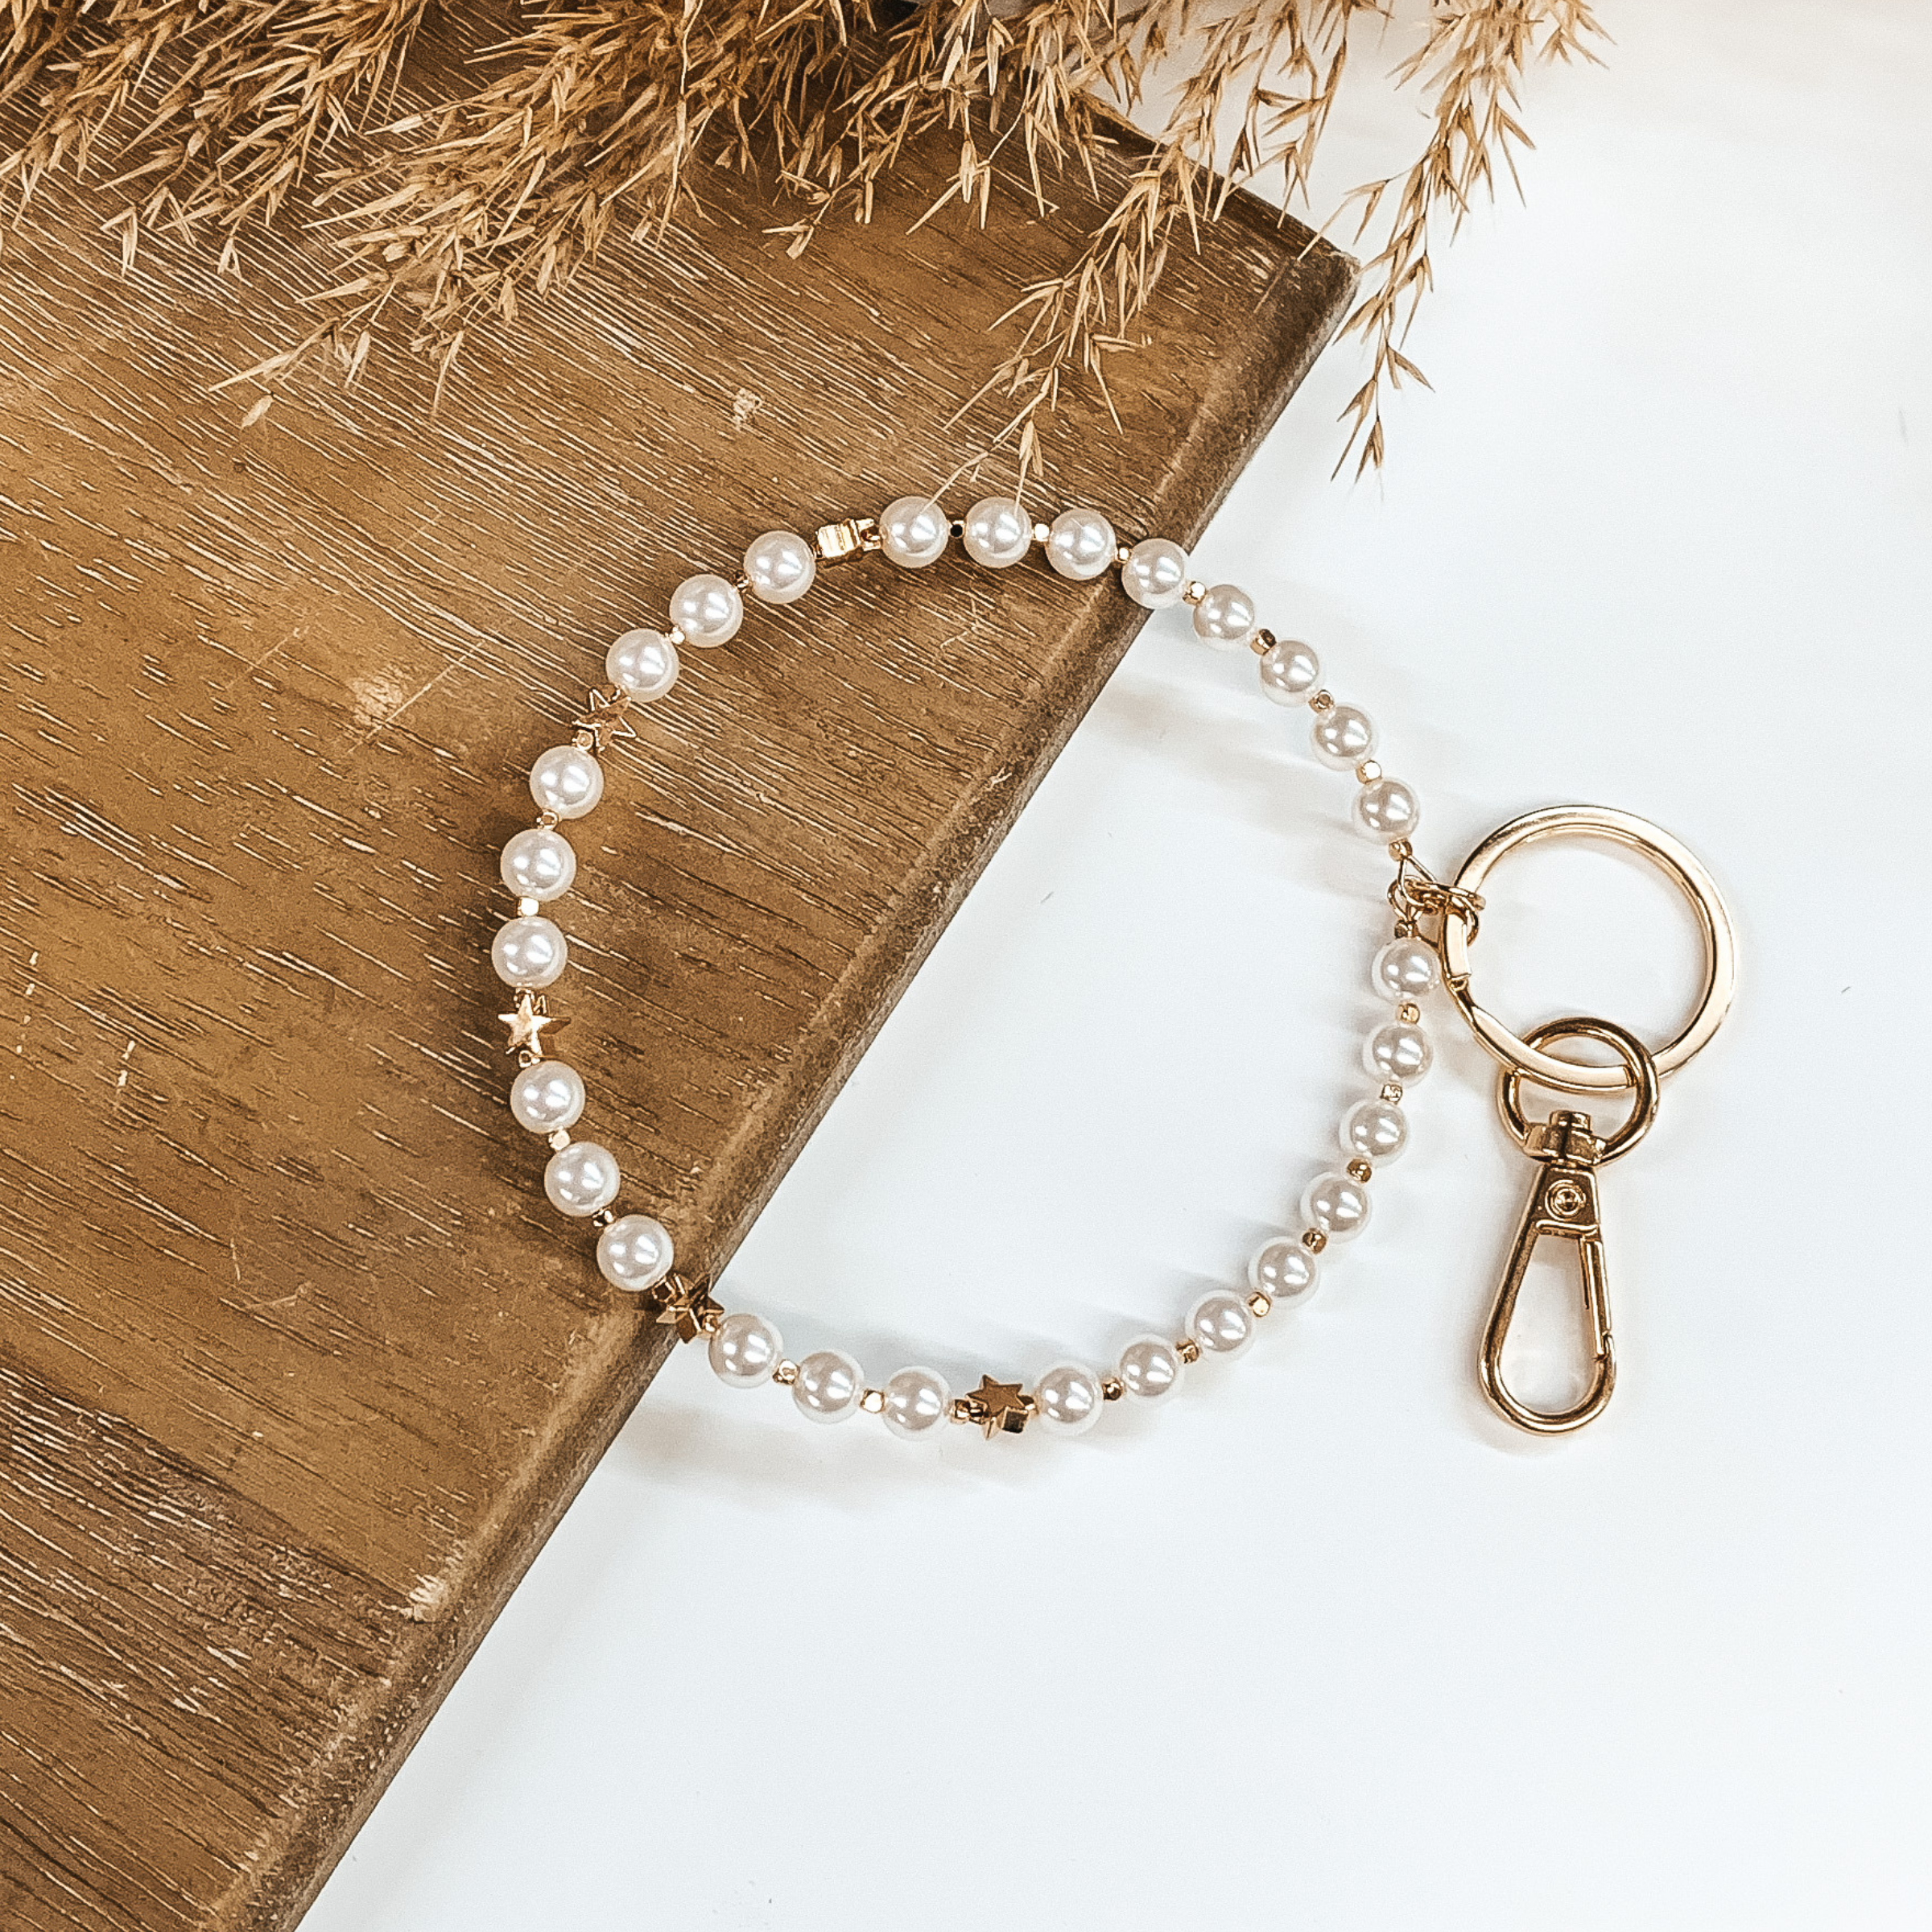 Pearly Whites Bangle Key Ring with Gold Stars - Giddy Up Glamour Boutique